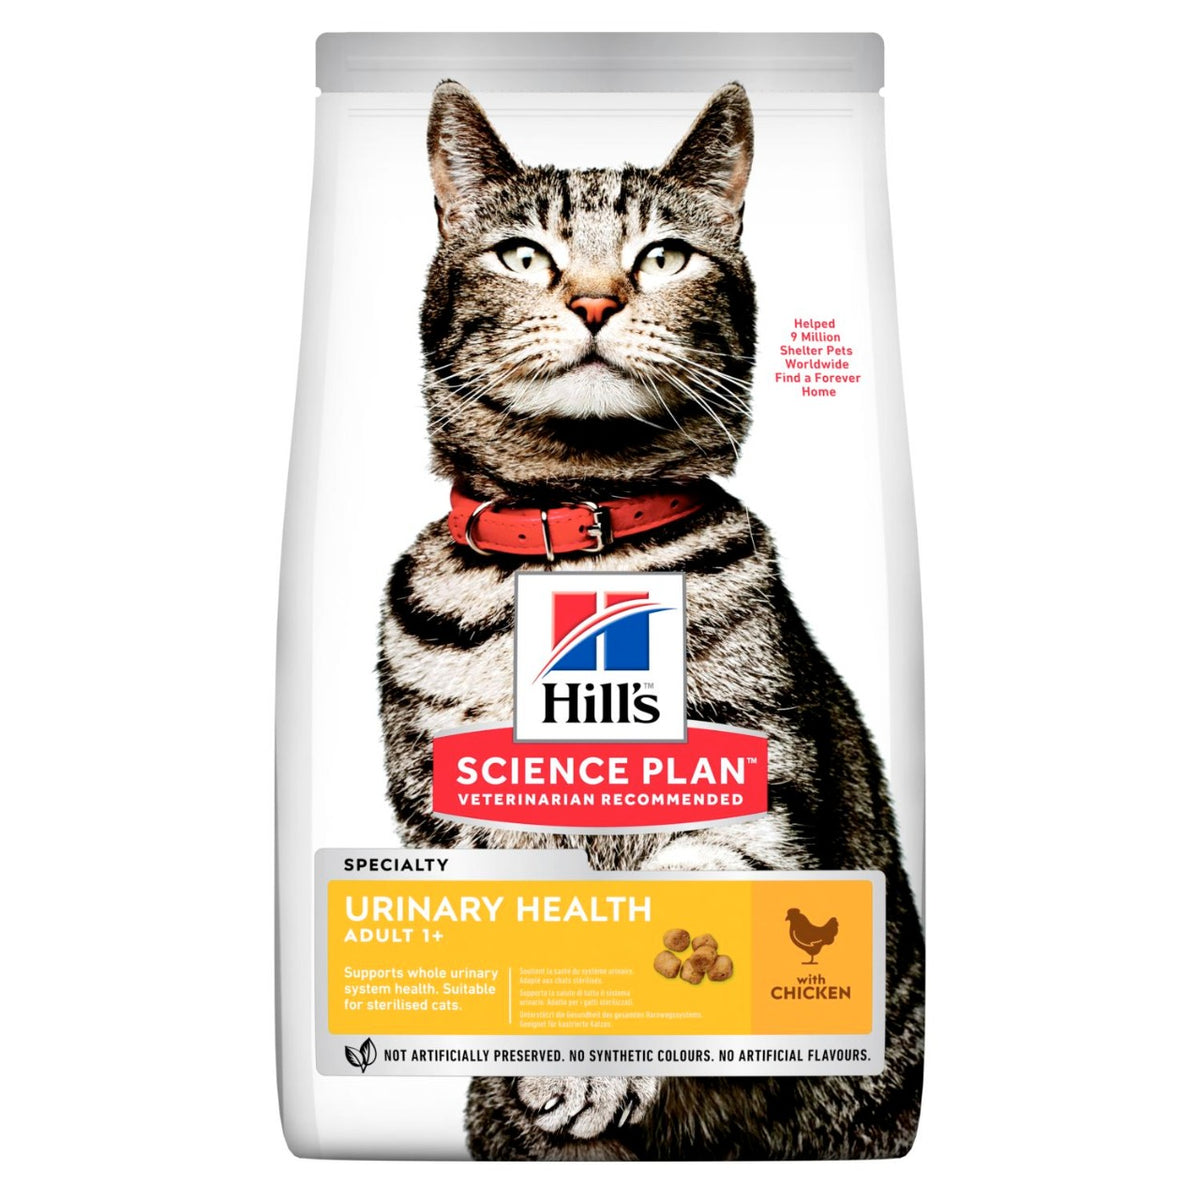 Hill’s Science Plan Urinary Health Adult Cat Food With Chicken (1.5kg)